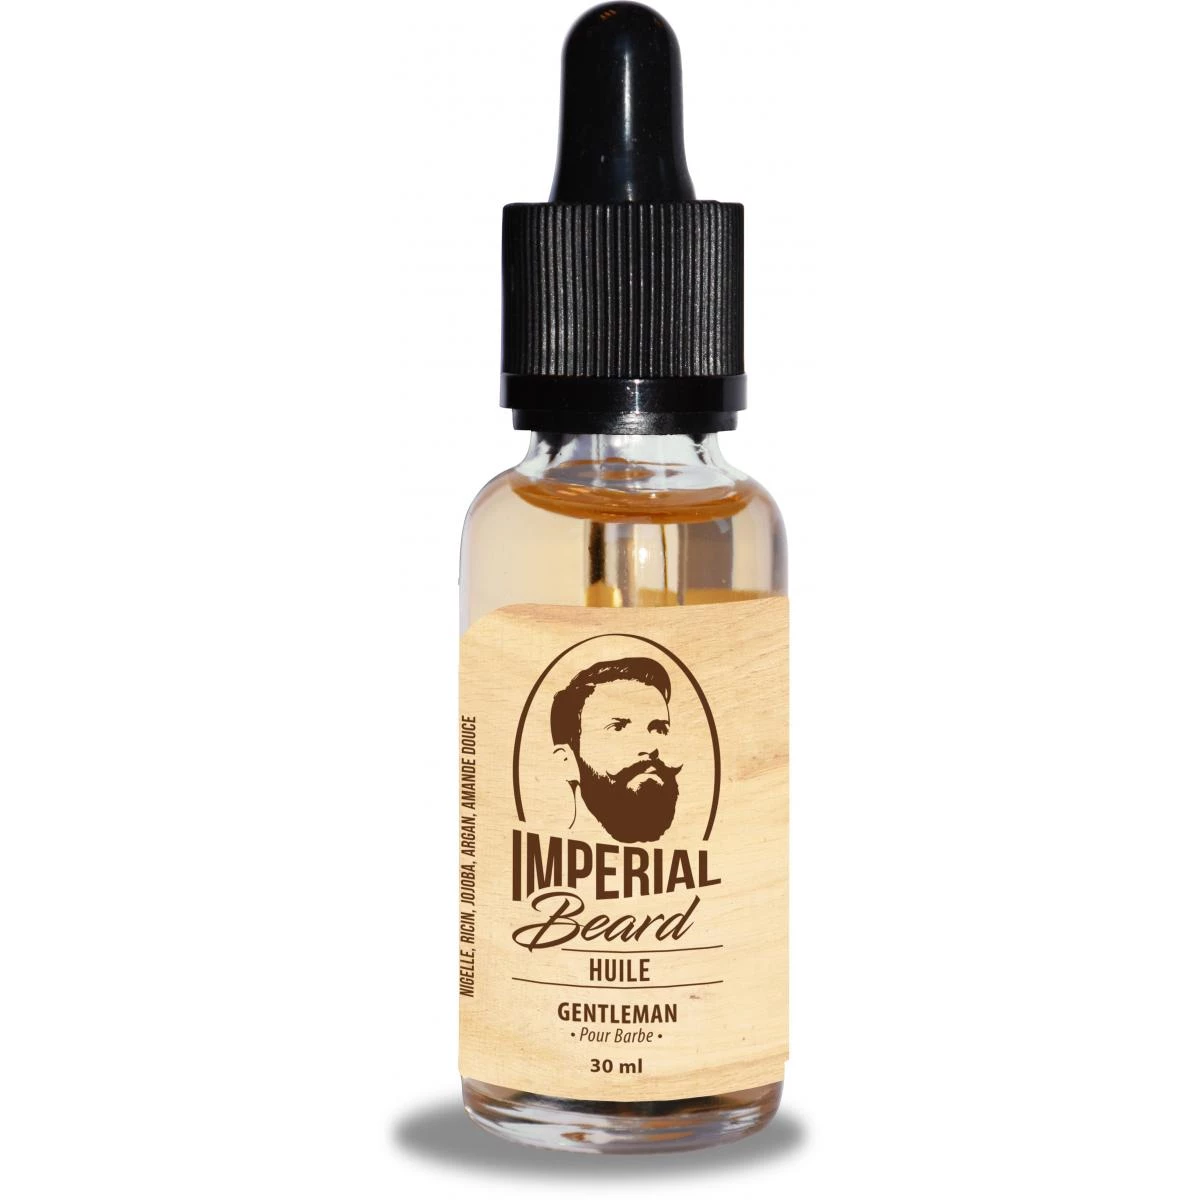 Imperial Beard huile pour barbe